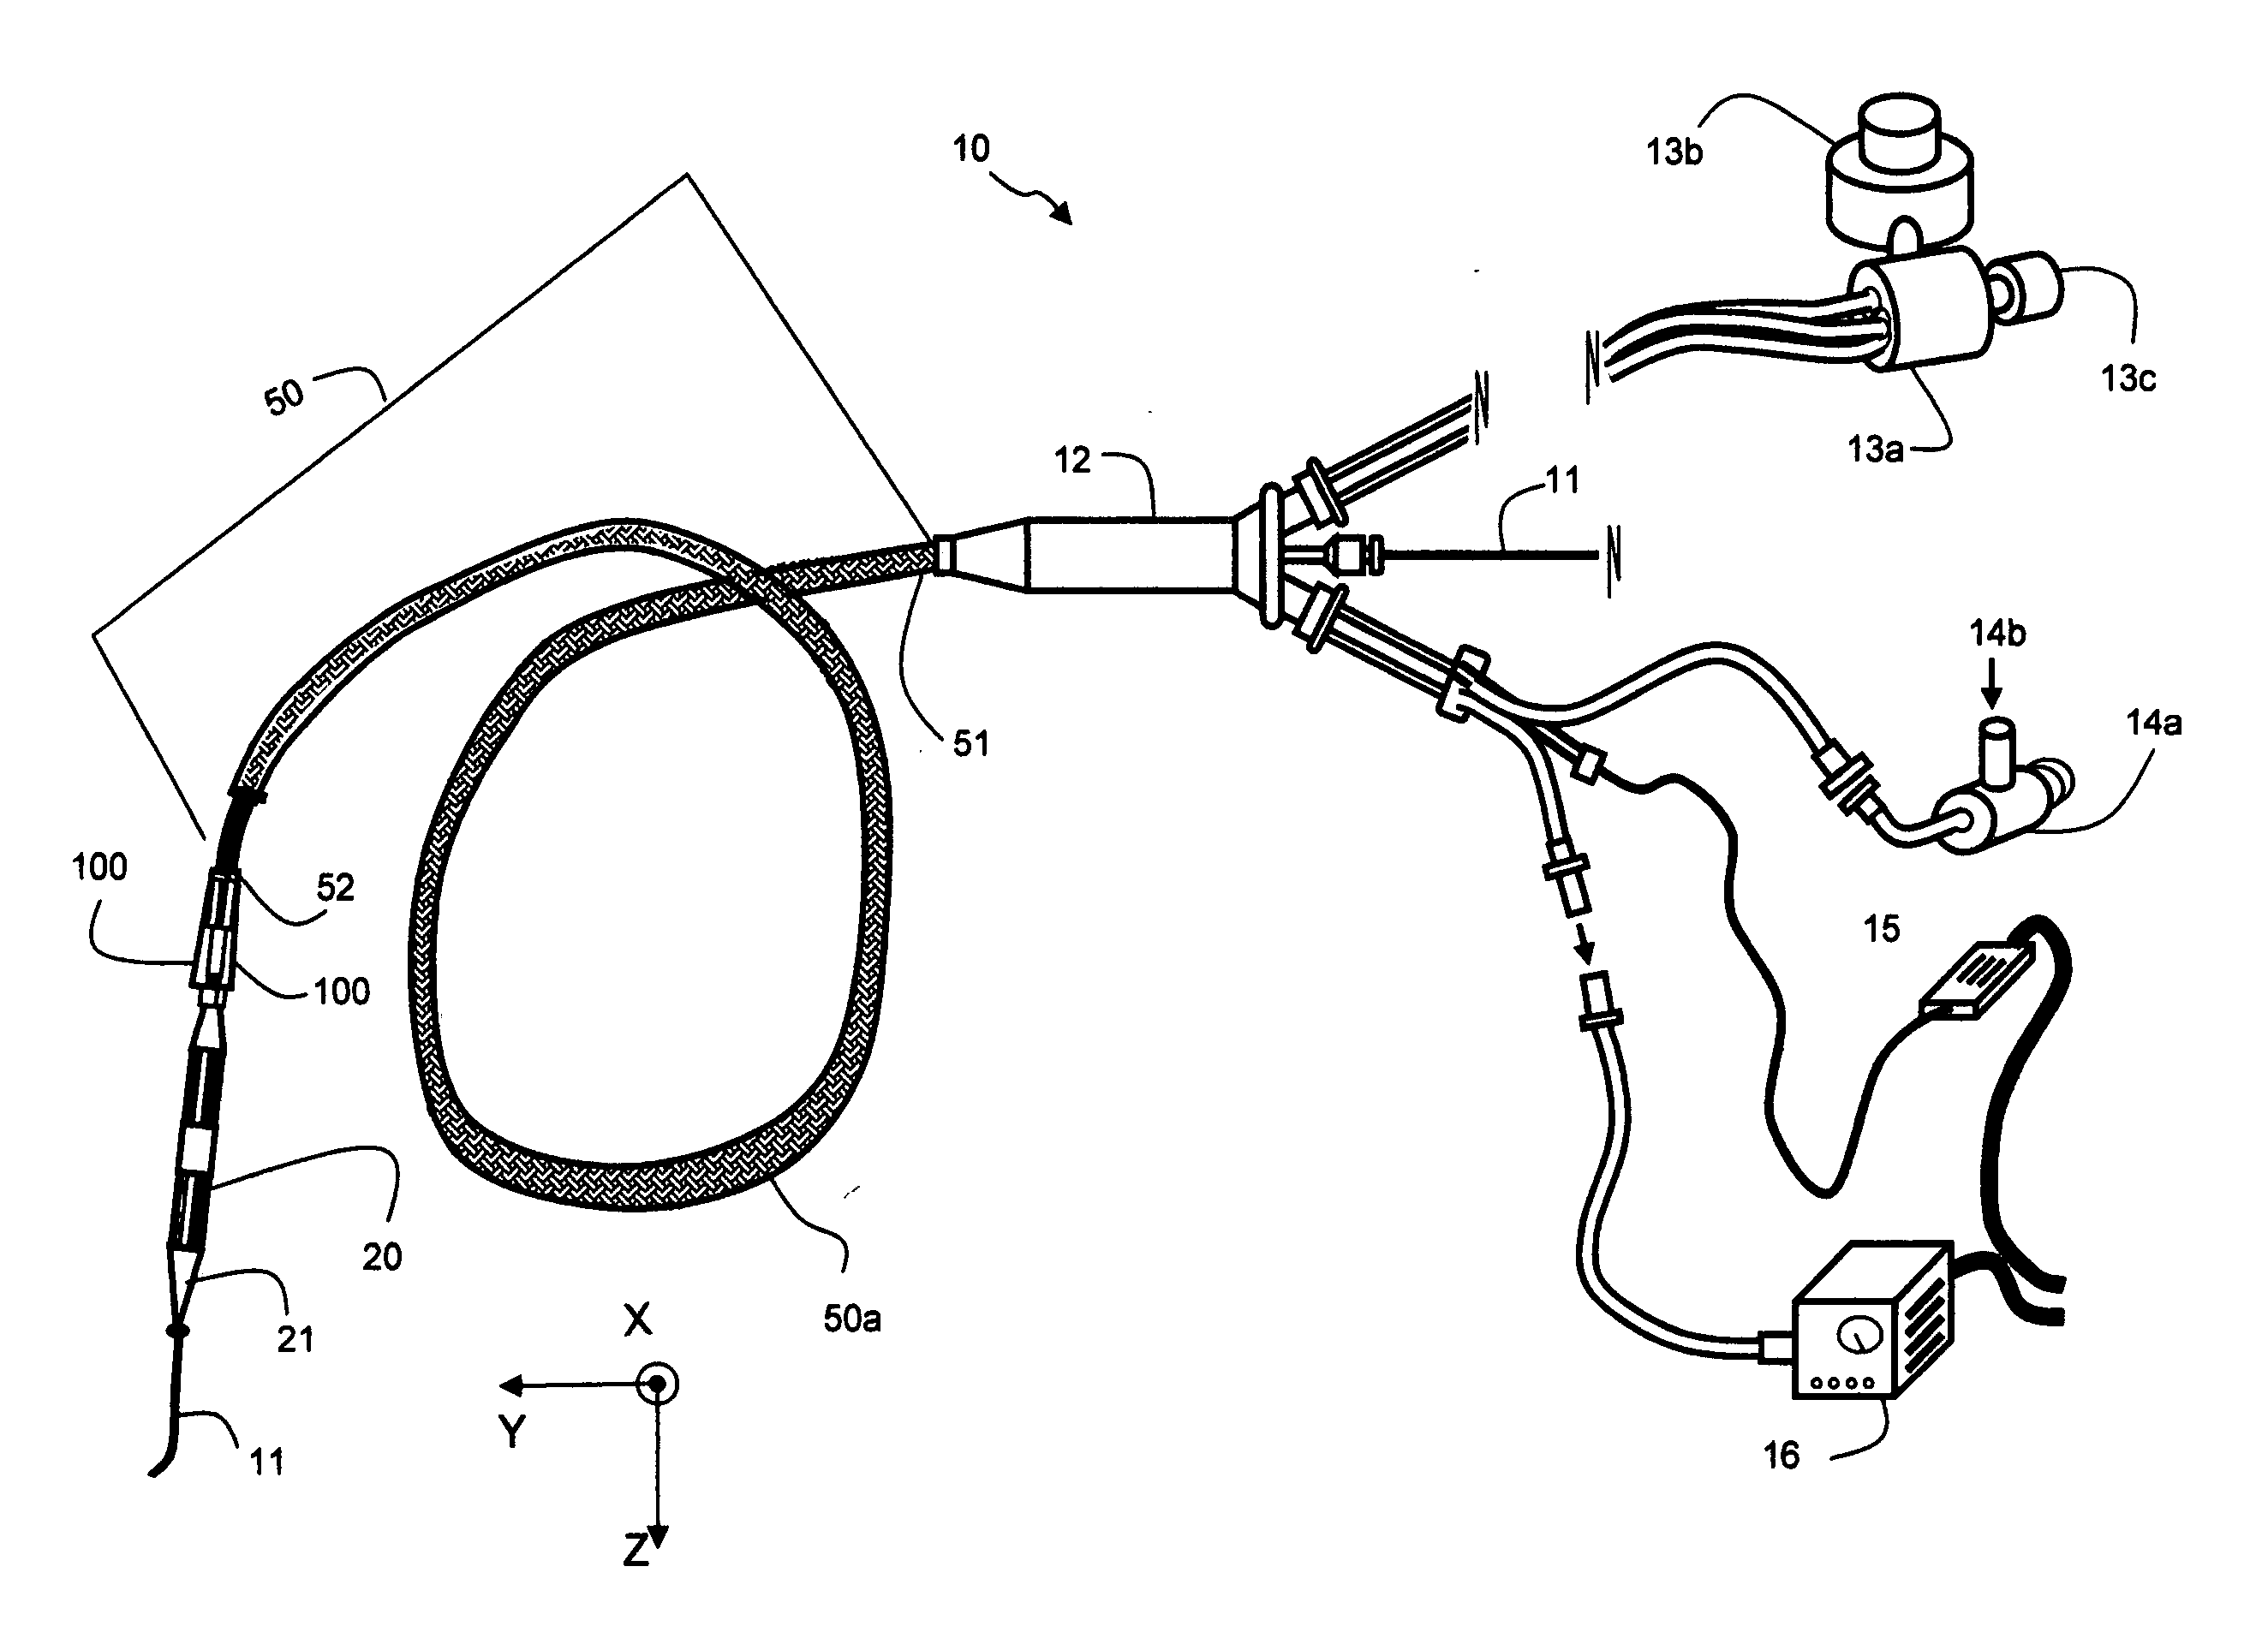 Intravascular ultrasound catheter device and method for ablating atheroma